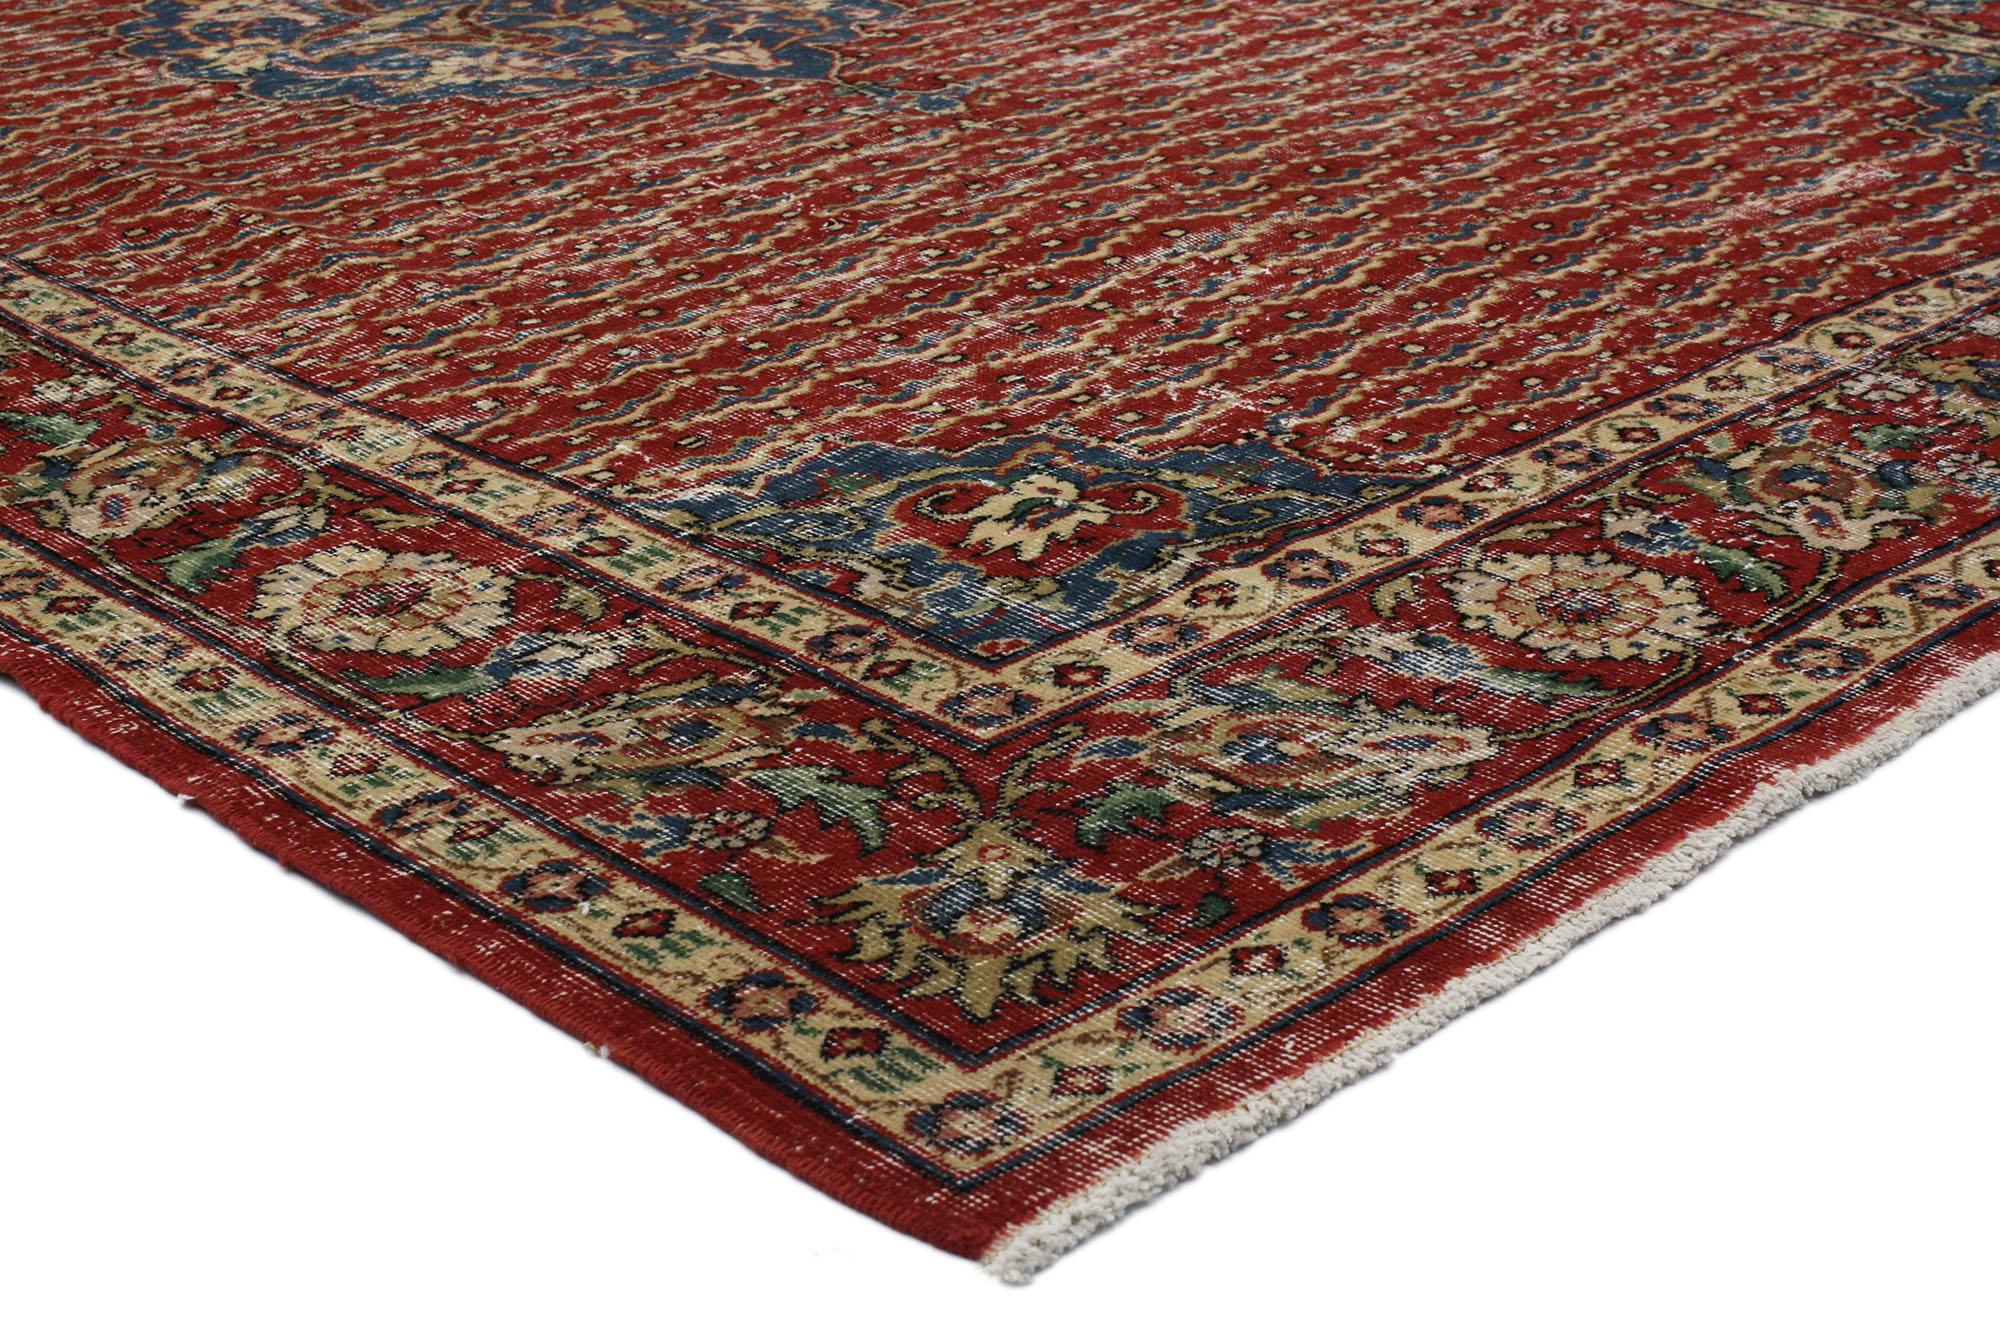 51538 Rustic Vintage Turkish Sivas Rug, 06'07  X 10'01.
Rustic charm meets traditional sensibility in this hand knotted vintage Turkish Sivas rug. The decorative elegance and time-softened color palette woven into this piece work together creating a